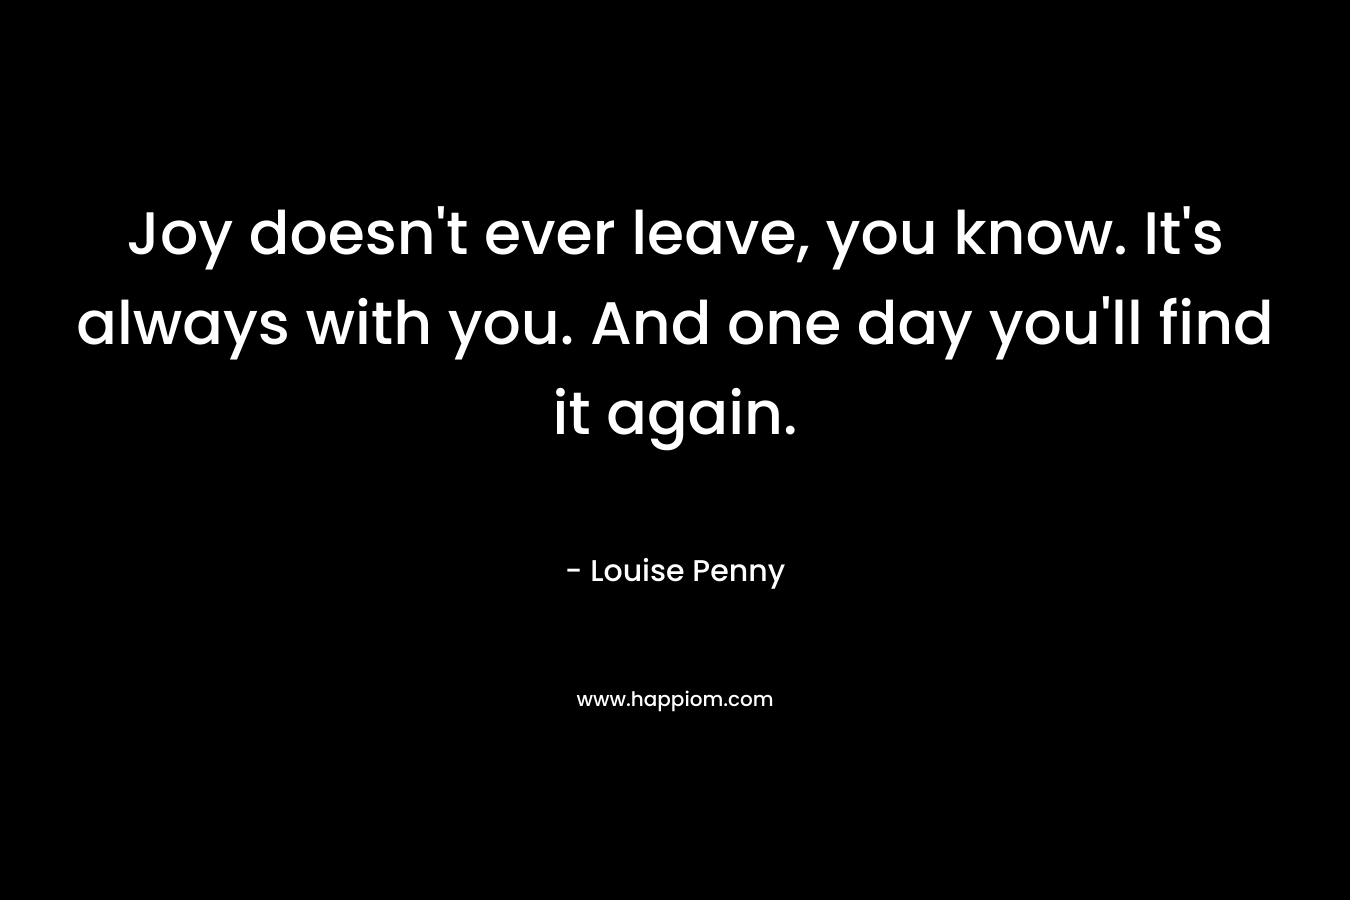 Joy doesn’t ever leave, you know. It’s always with you. And one day you’ll find it again. – Louise Penny